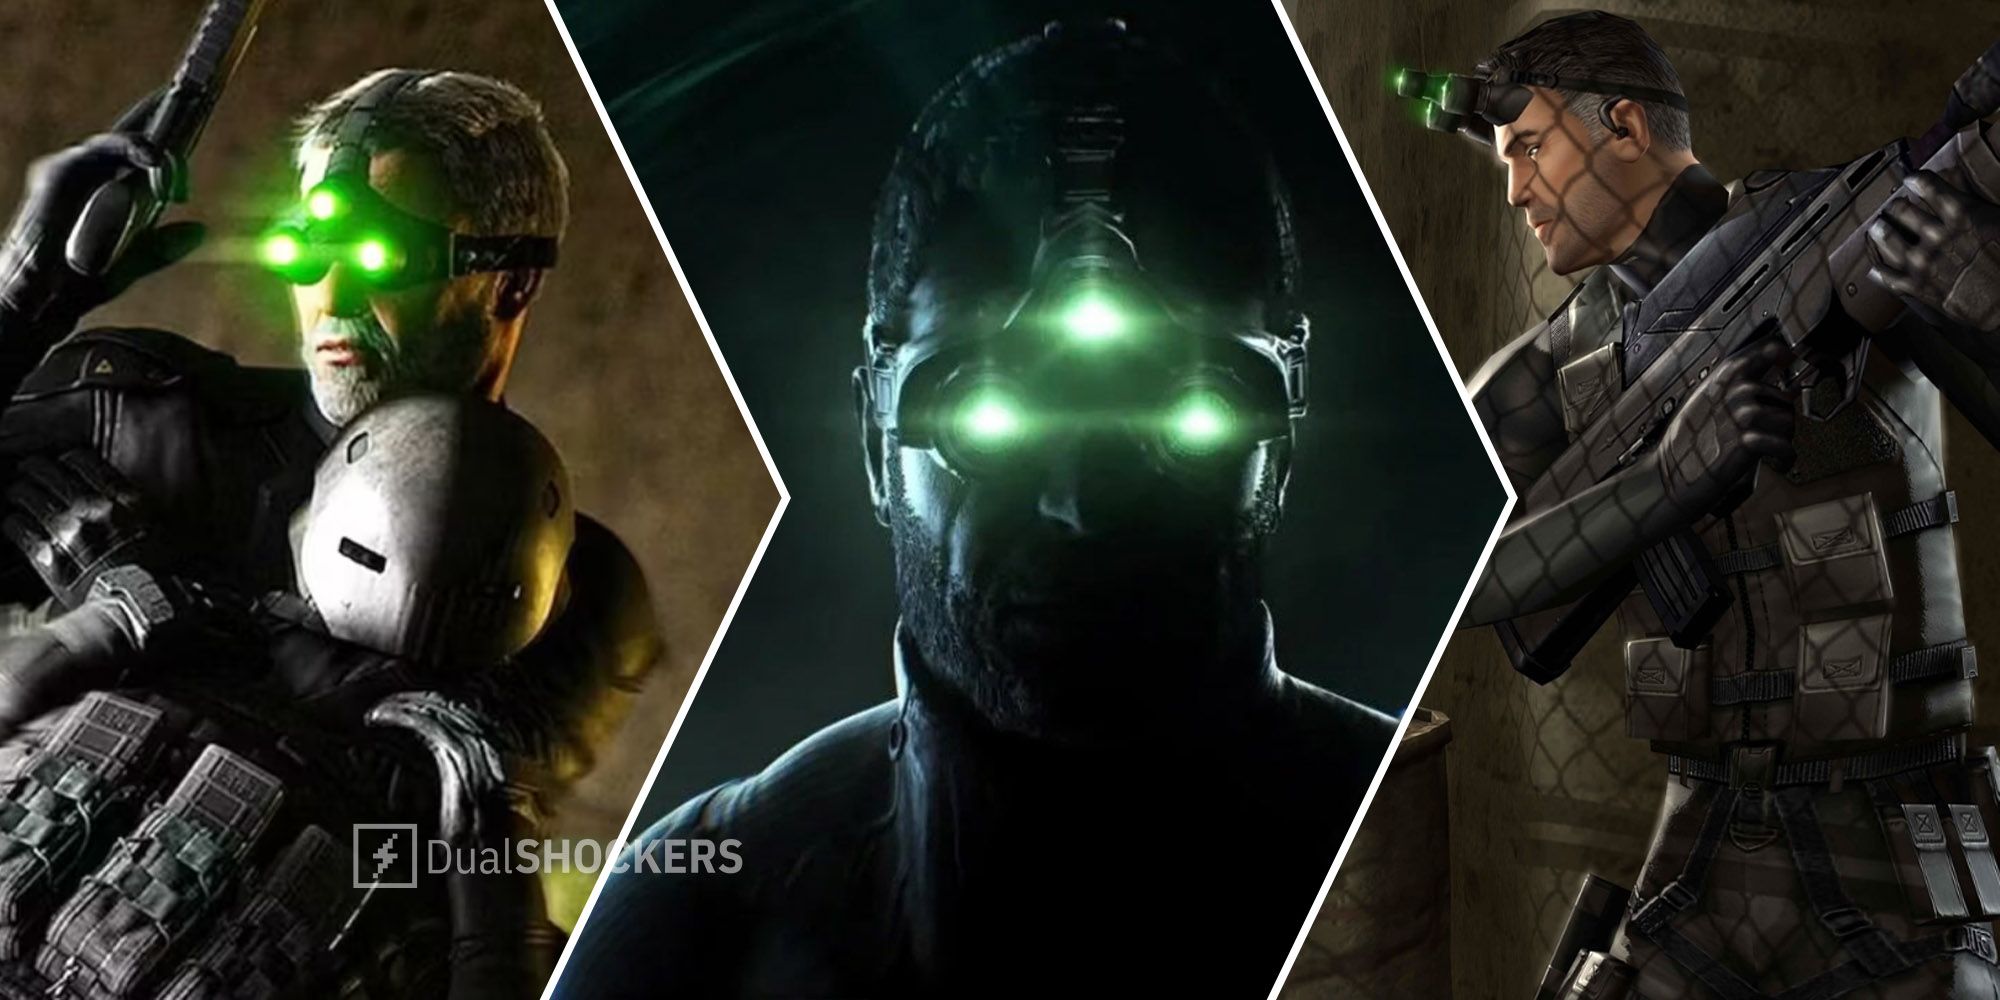 The original Splinter Cell is getting a full remake